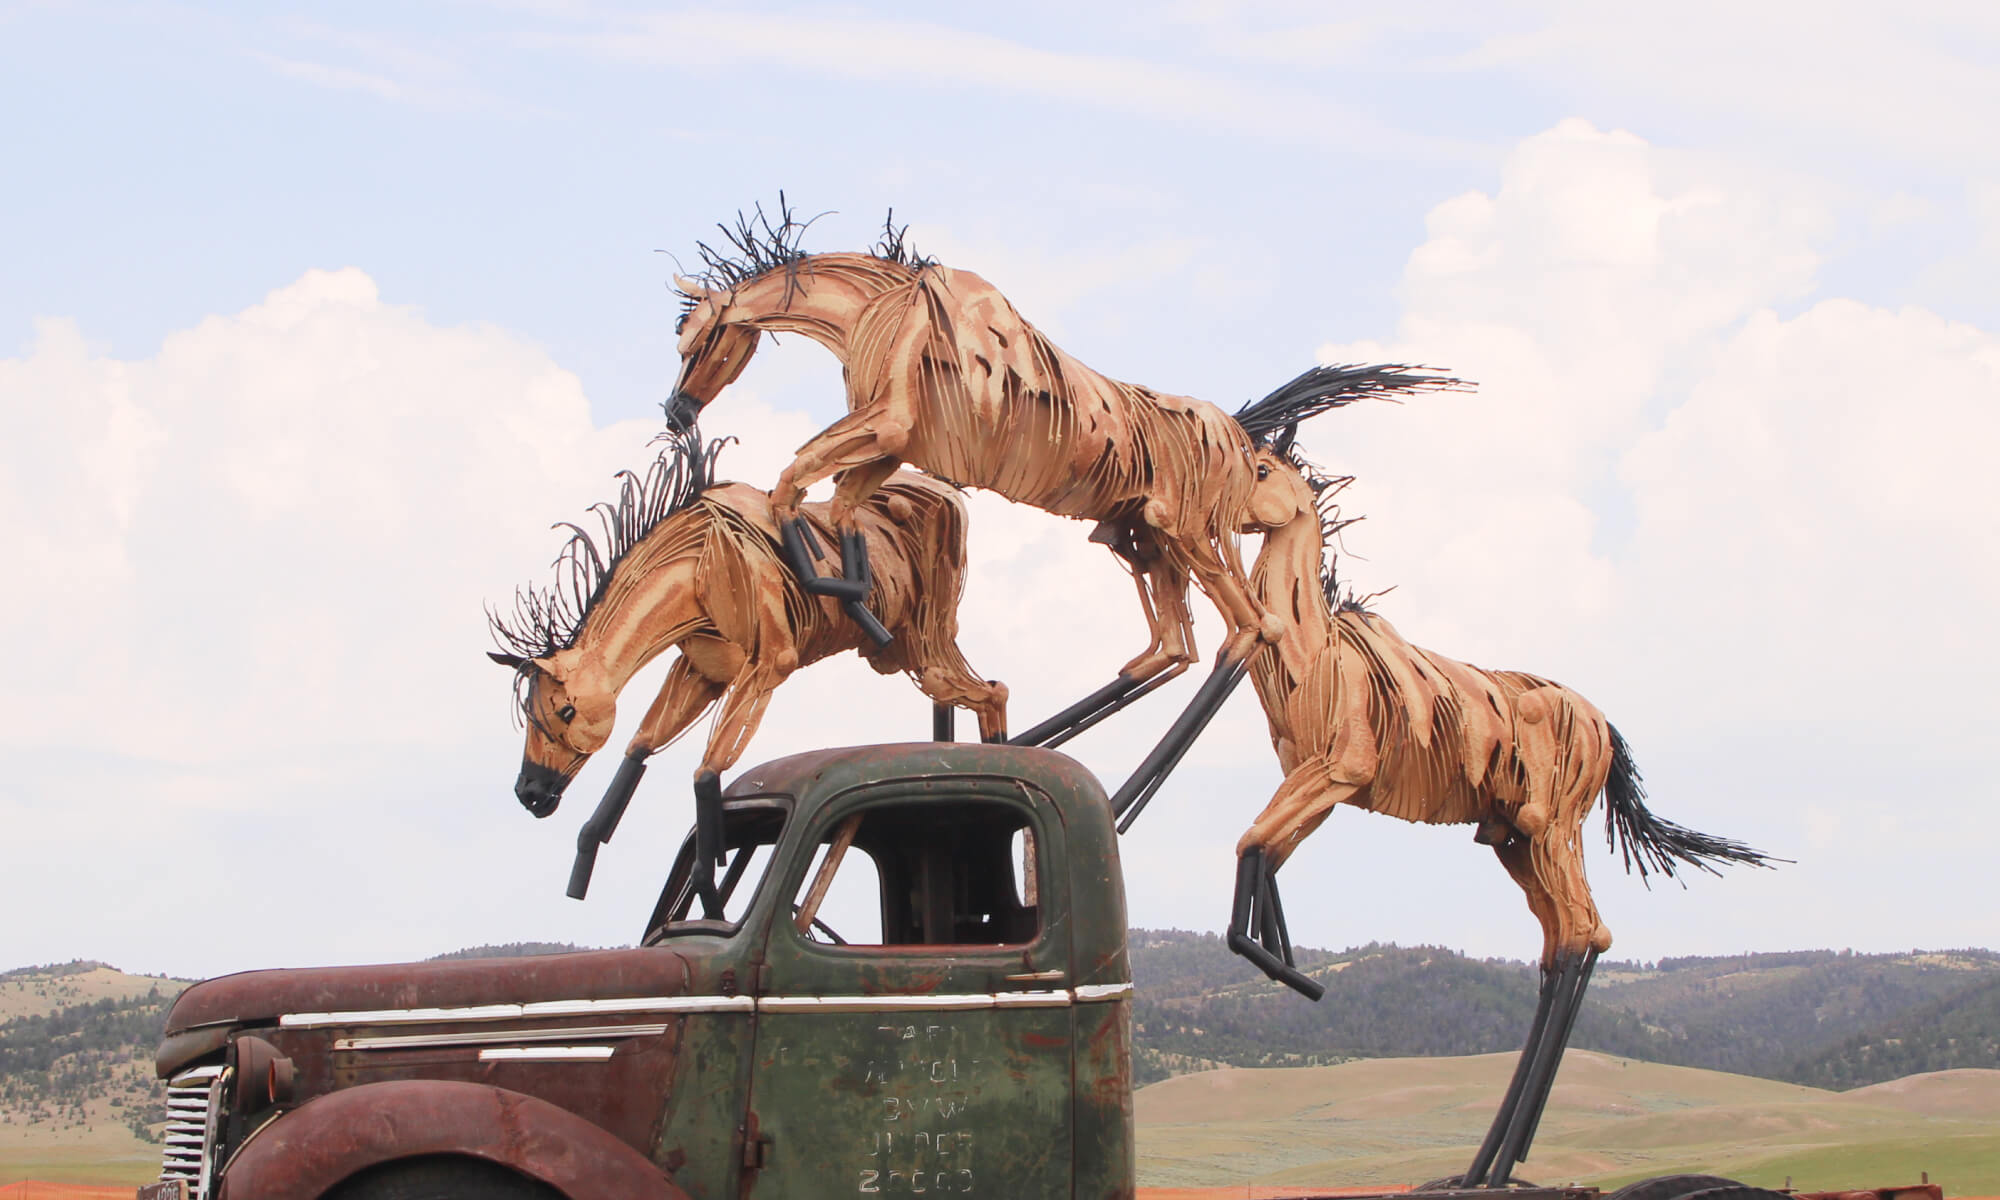 Jim Dolan sculpture called Three Buck Truck, with three horses running over the top of an old pickup truck